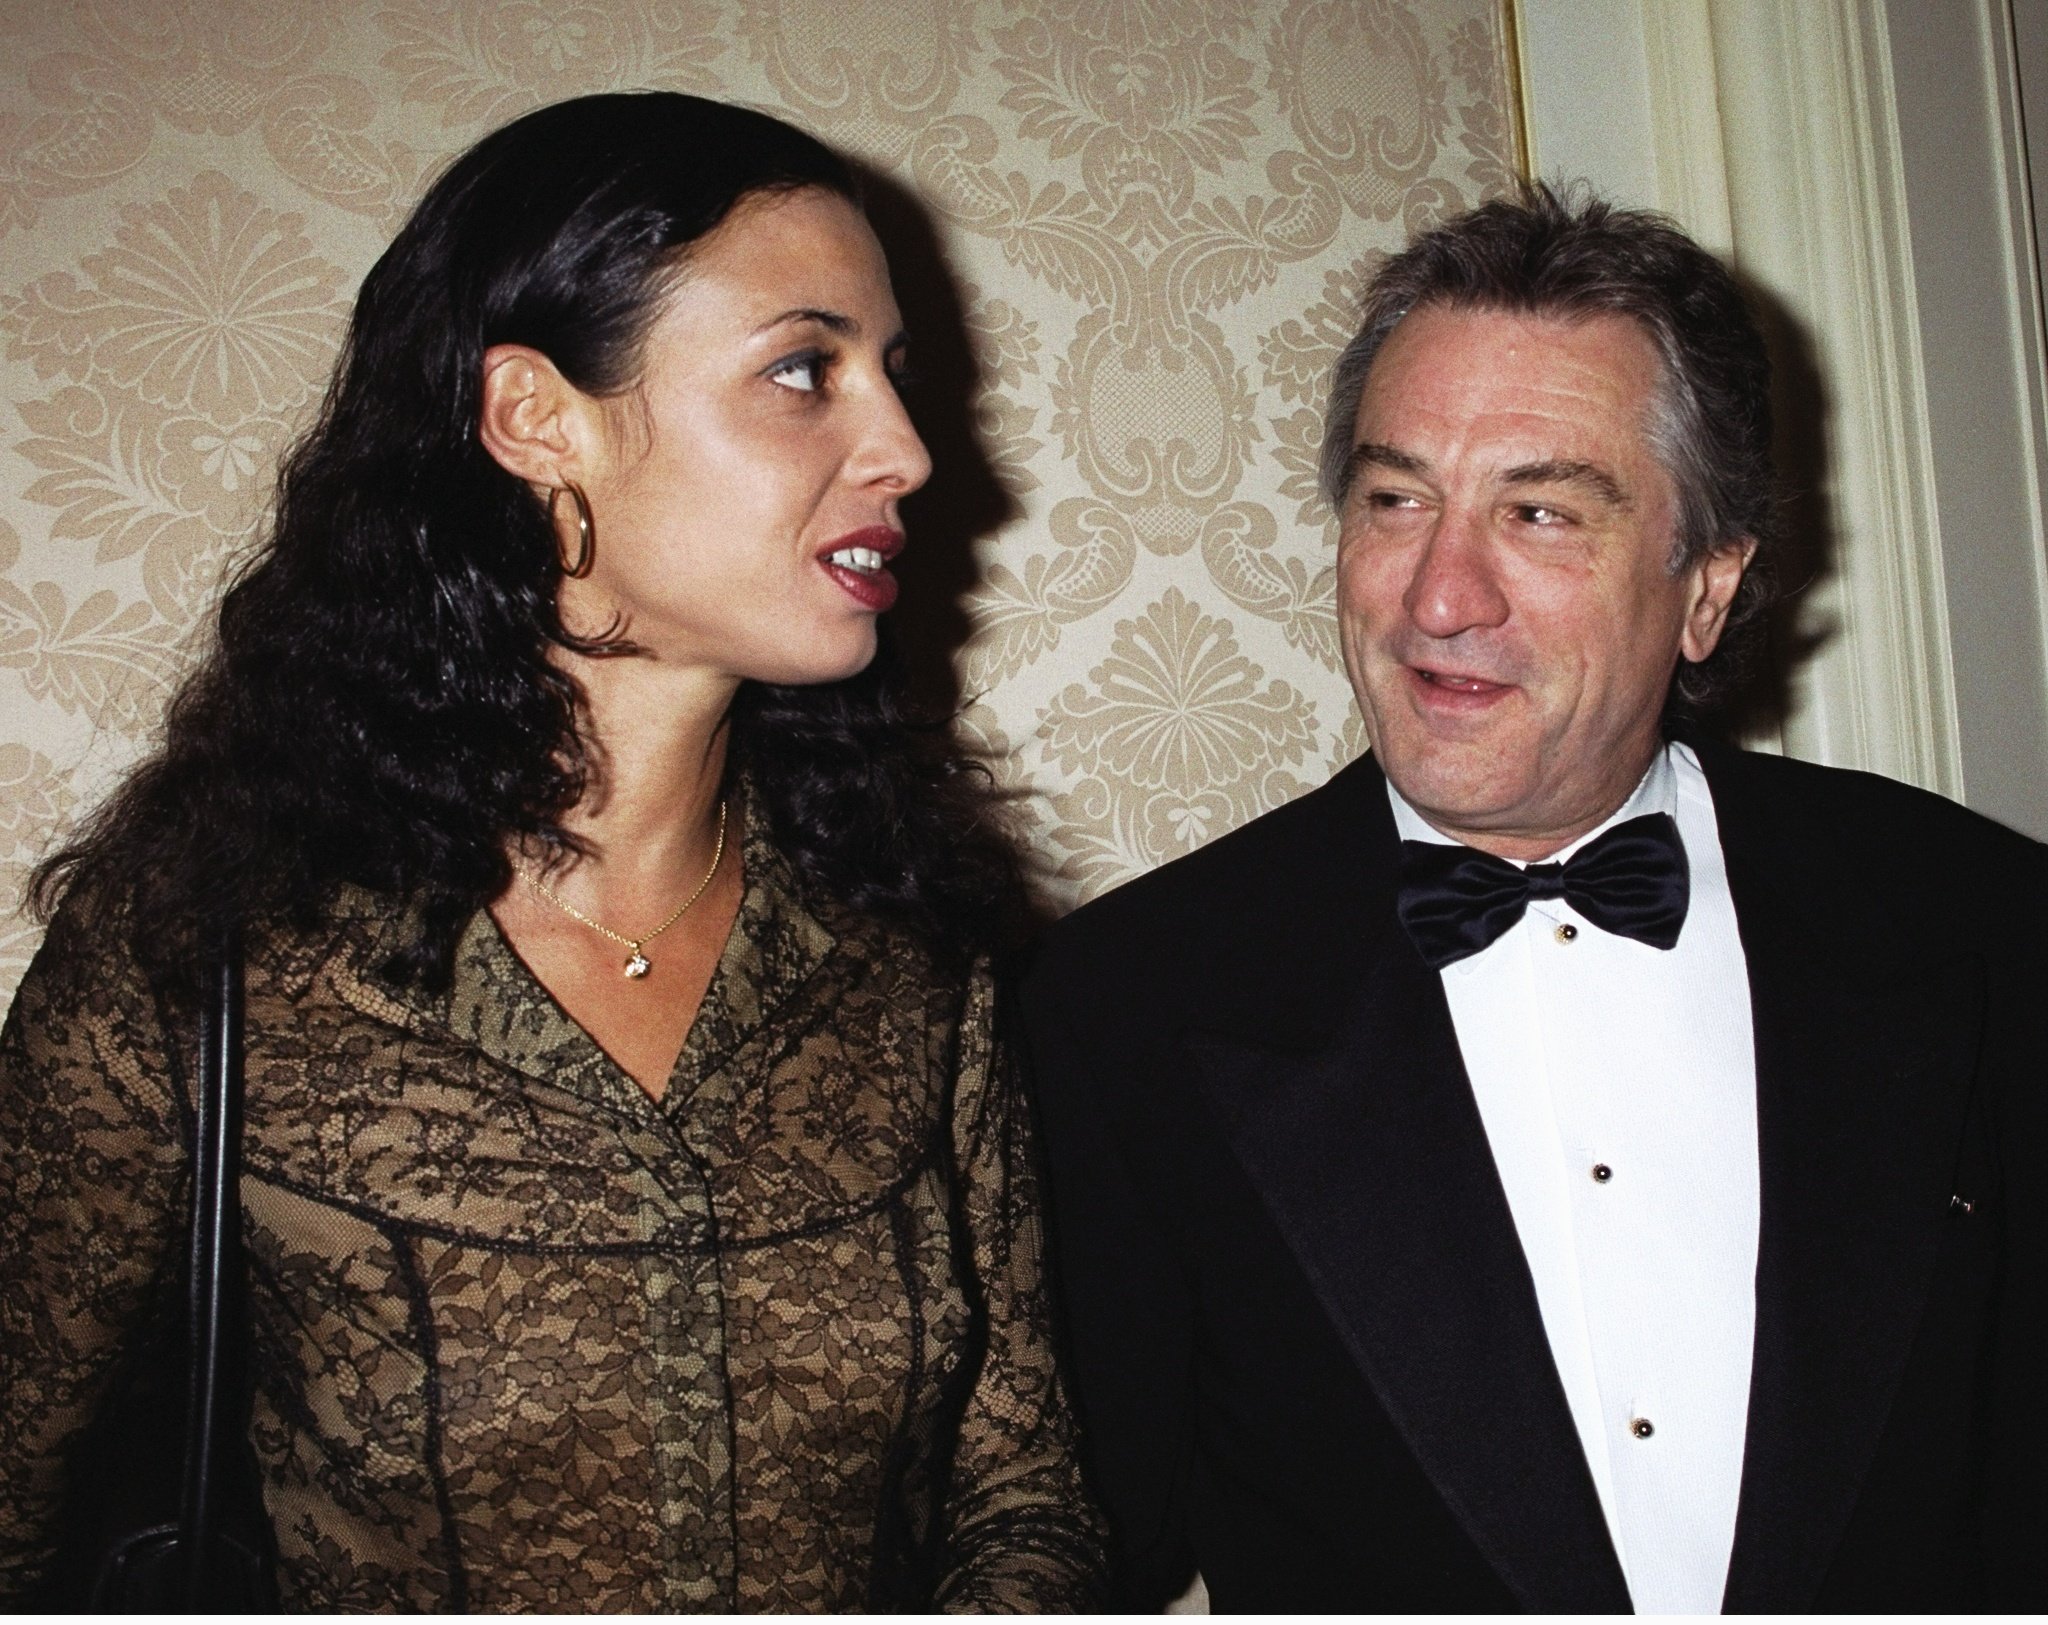 Robert De Niro and daughter Drena De Niro attend the Museum of the Moving Image dinner honoring film producer Jane Rosenthal at the St. Regis Hotel in 2000 in New York. | Source: Getty Images